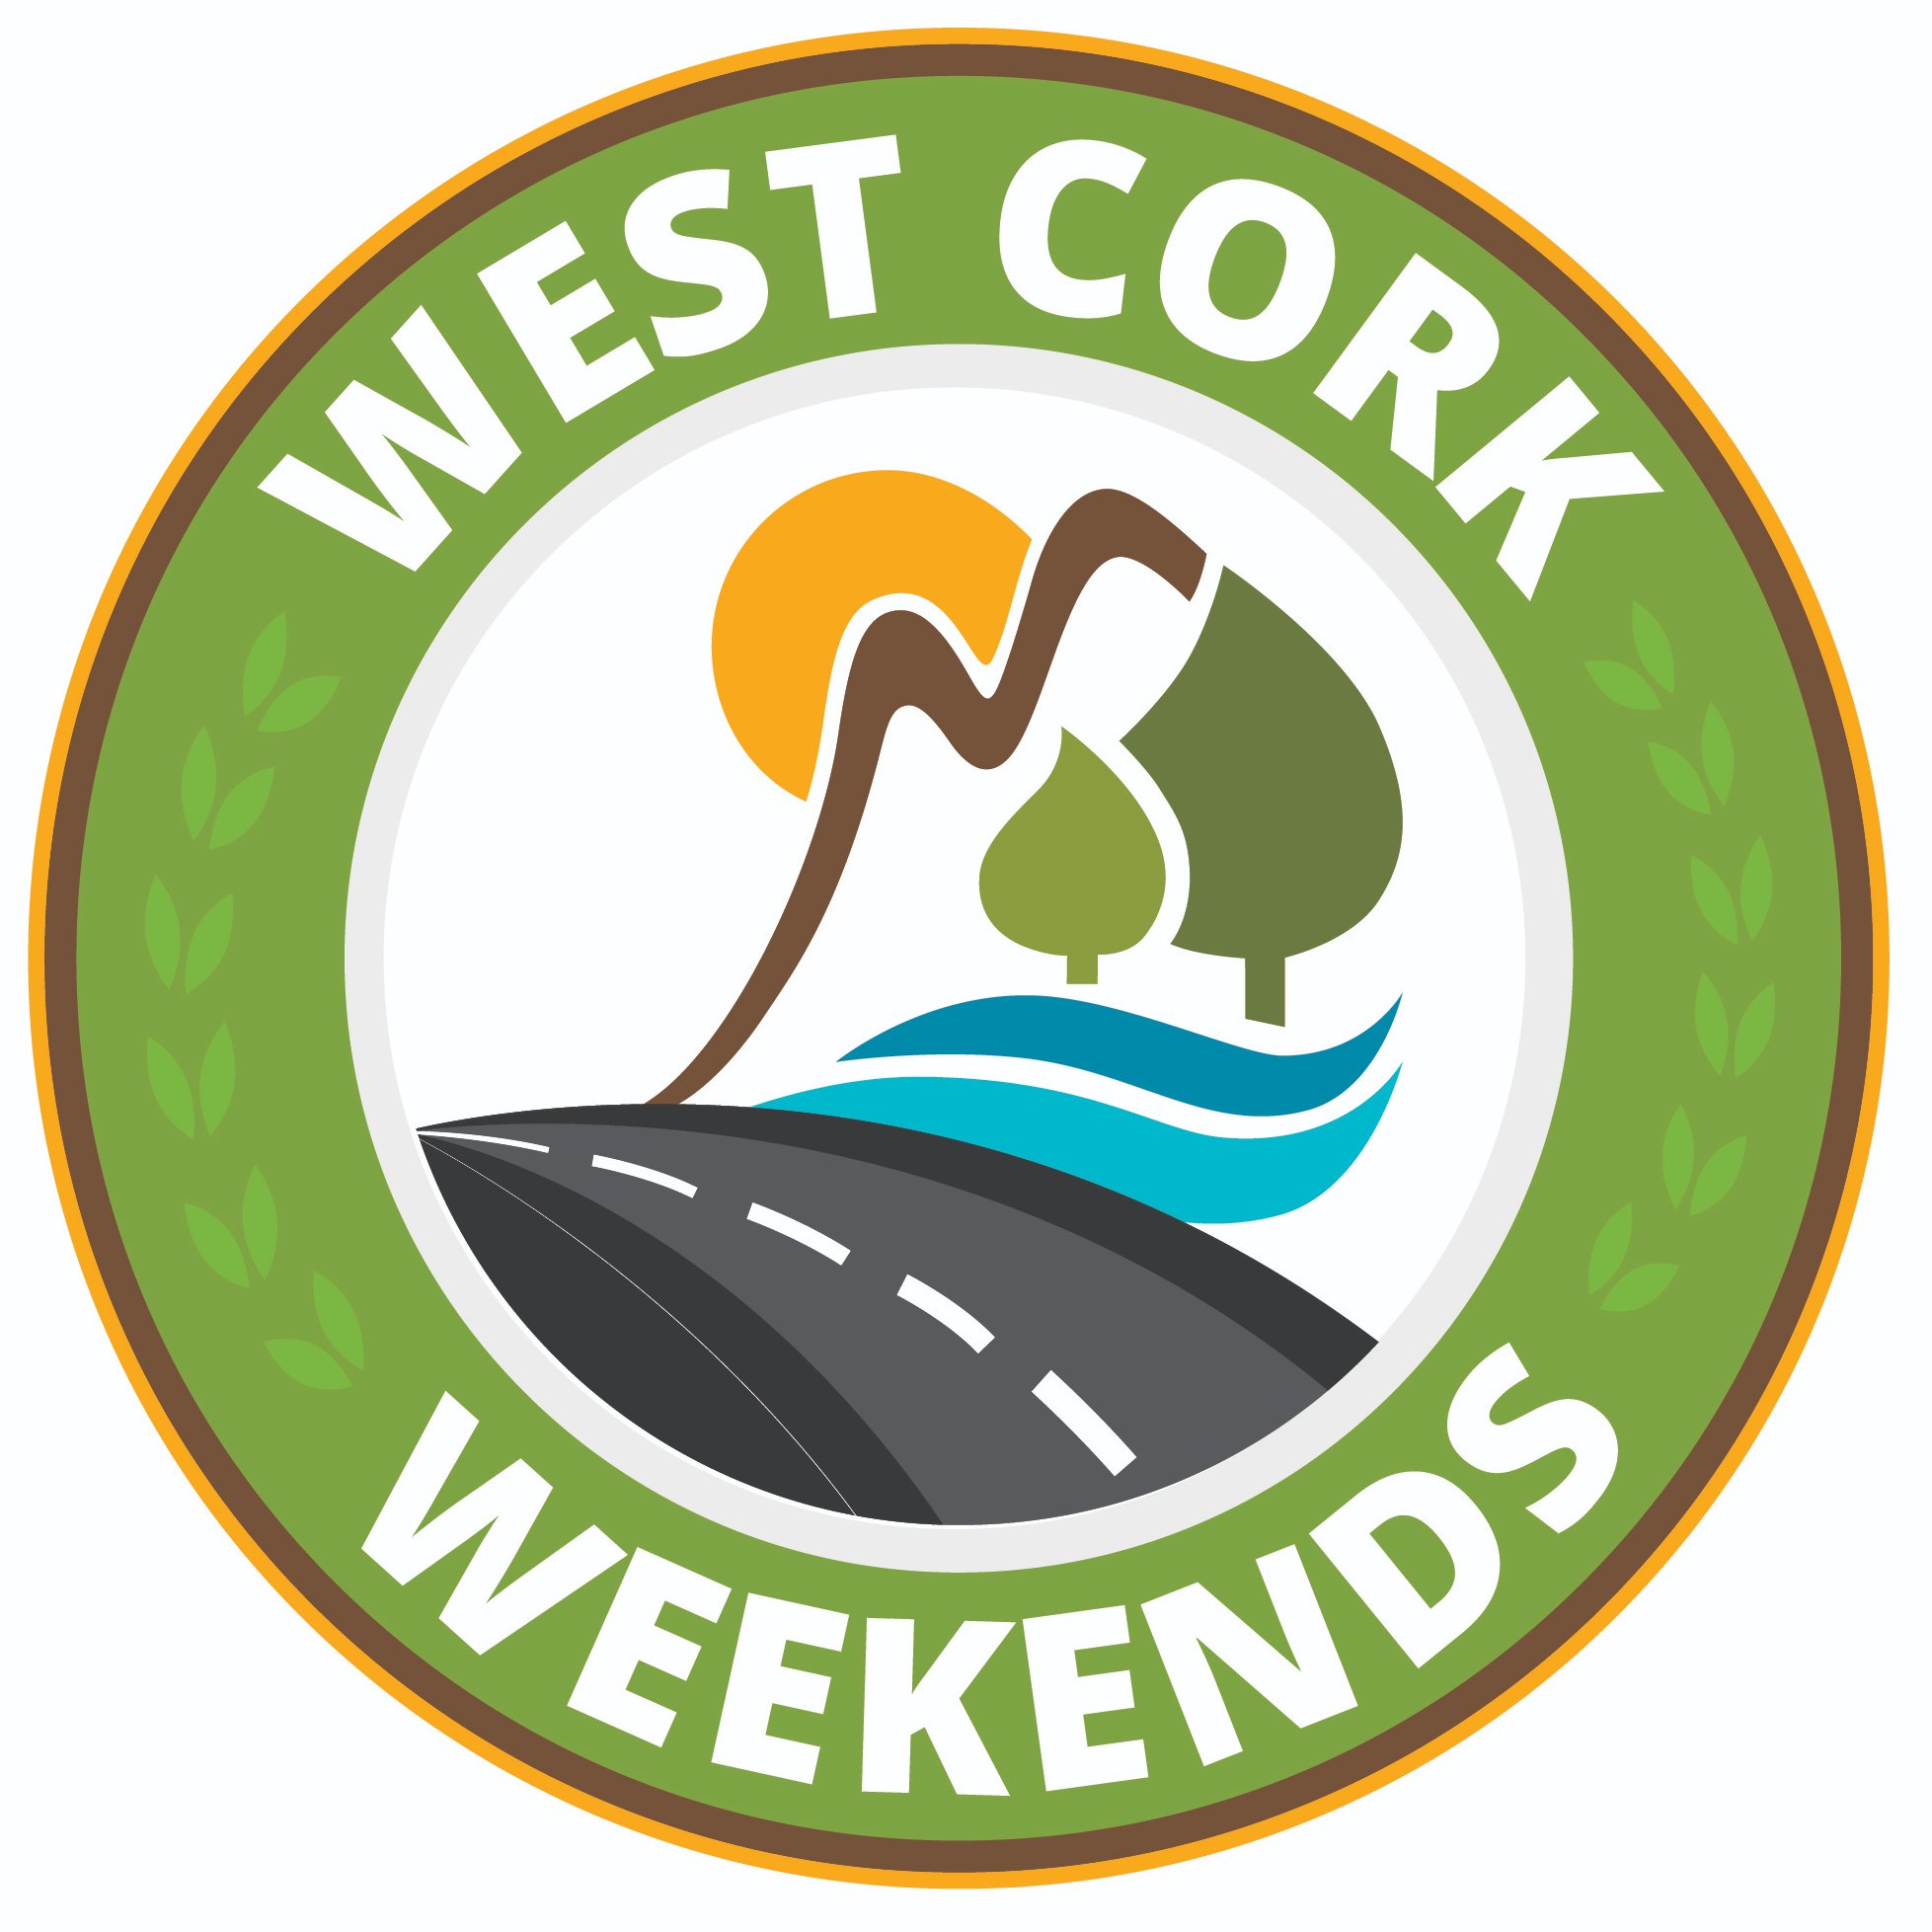 West Cork Weekends is on top of all the excitement in West Cork from Festivals and events for everyone to the best places to visit, stay, shop and enjoy a meal.